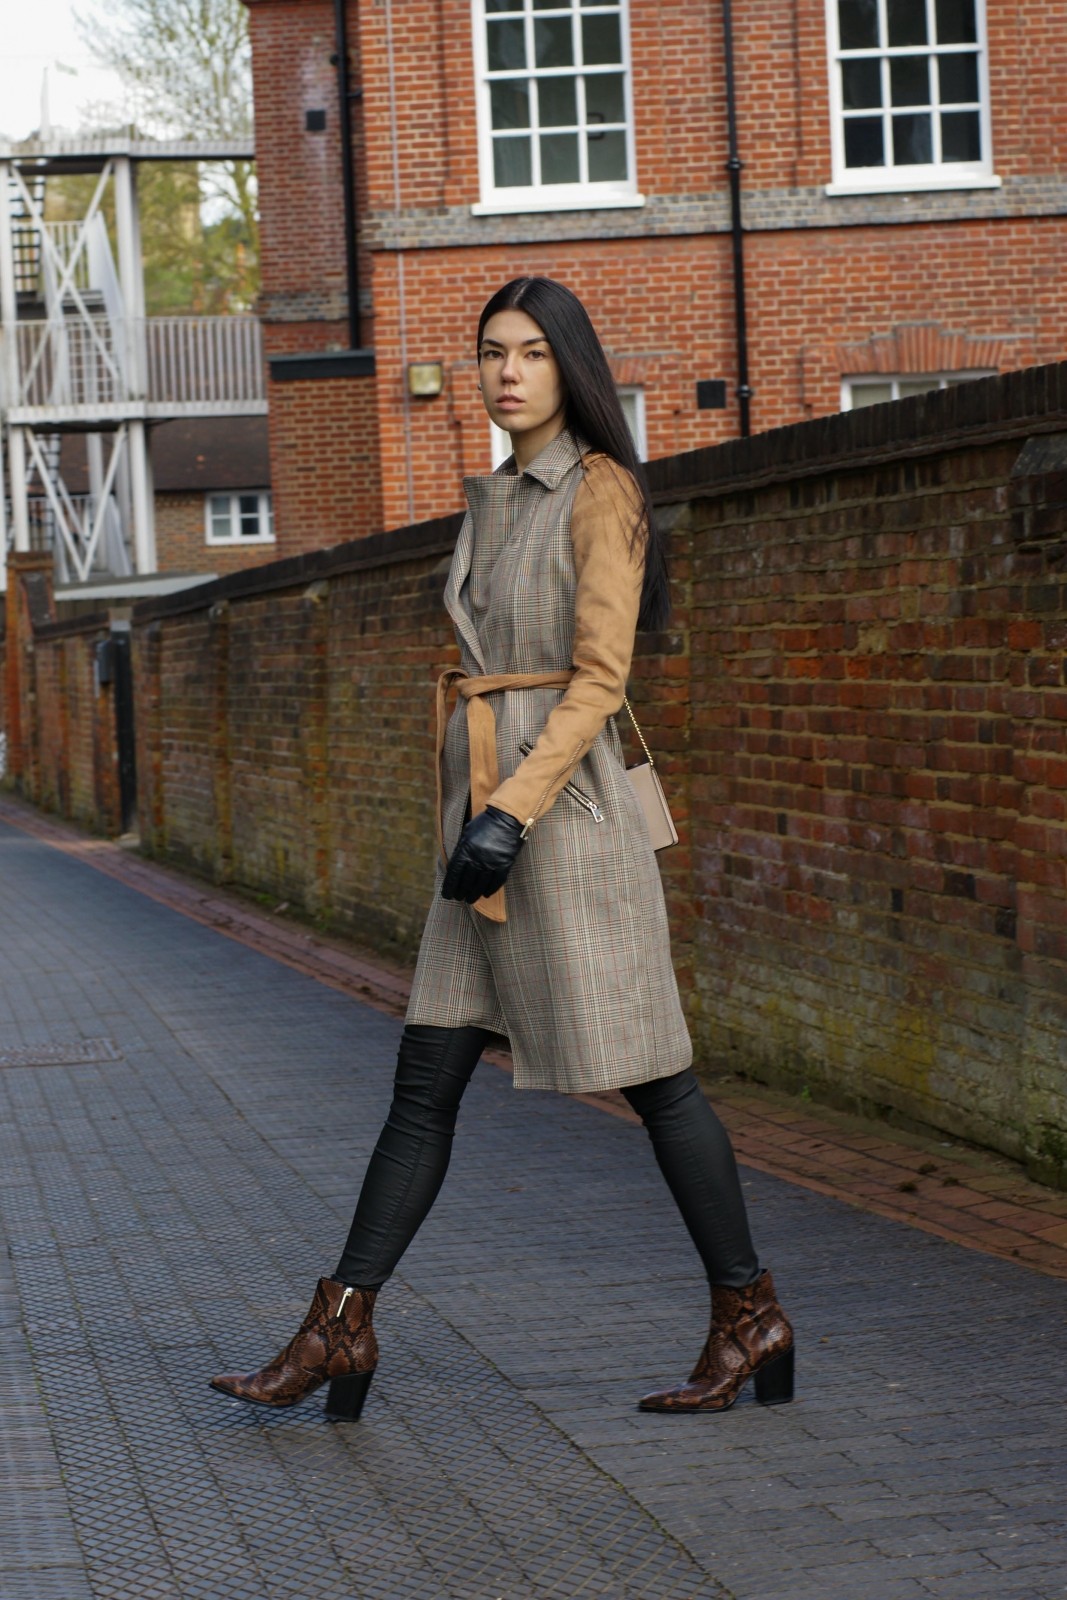 Daily Look | Suedette Check Trench Coat & Snake Print by Brunette on Demand